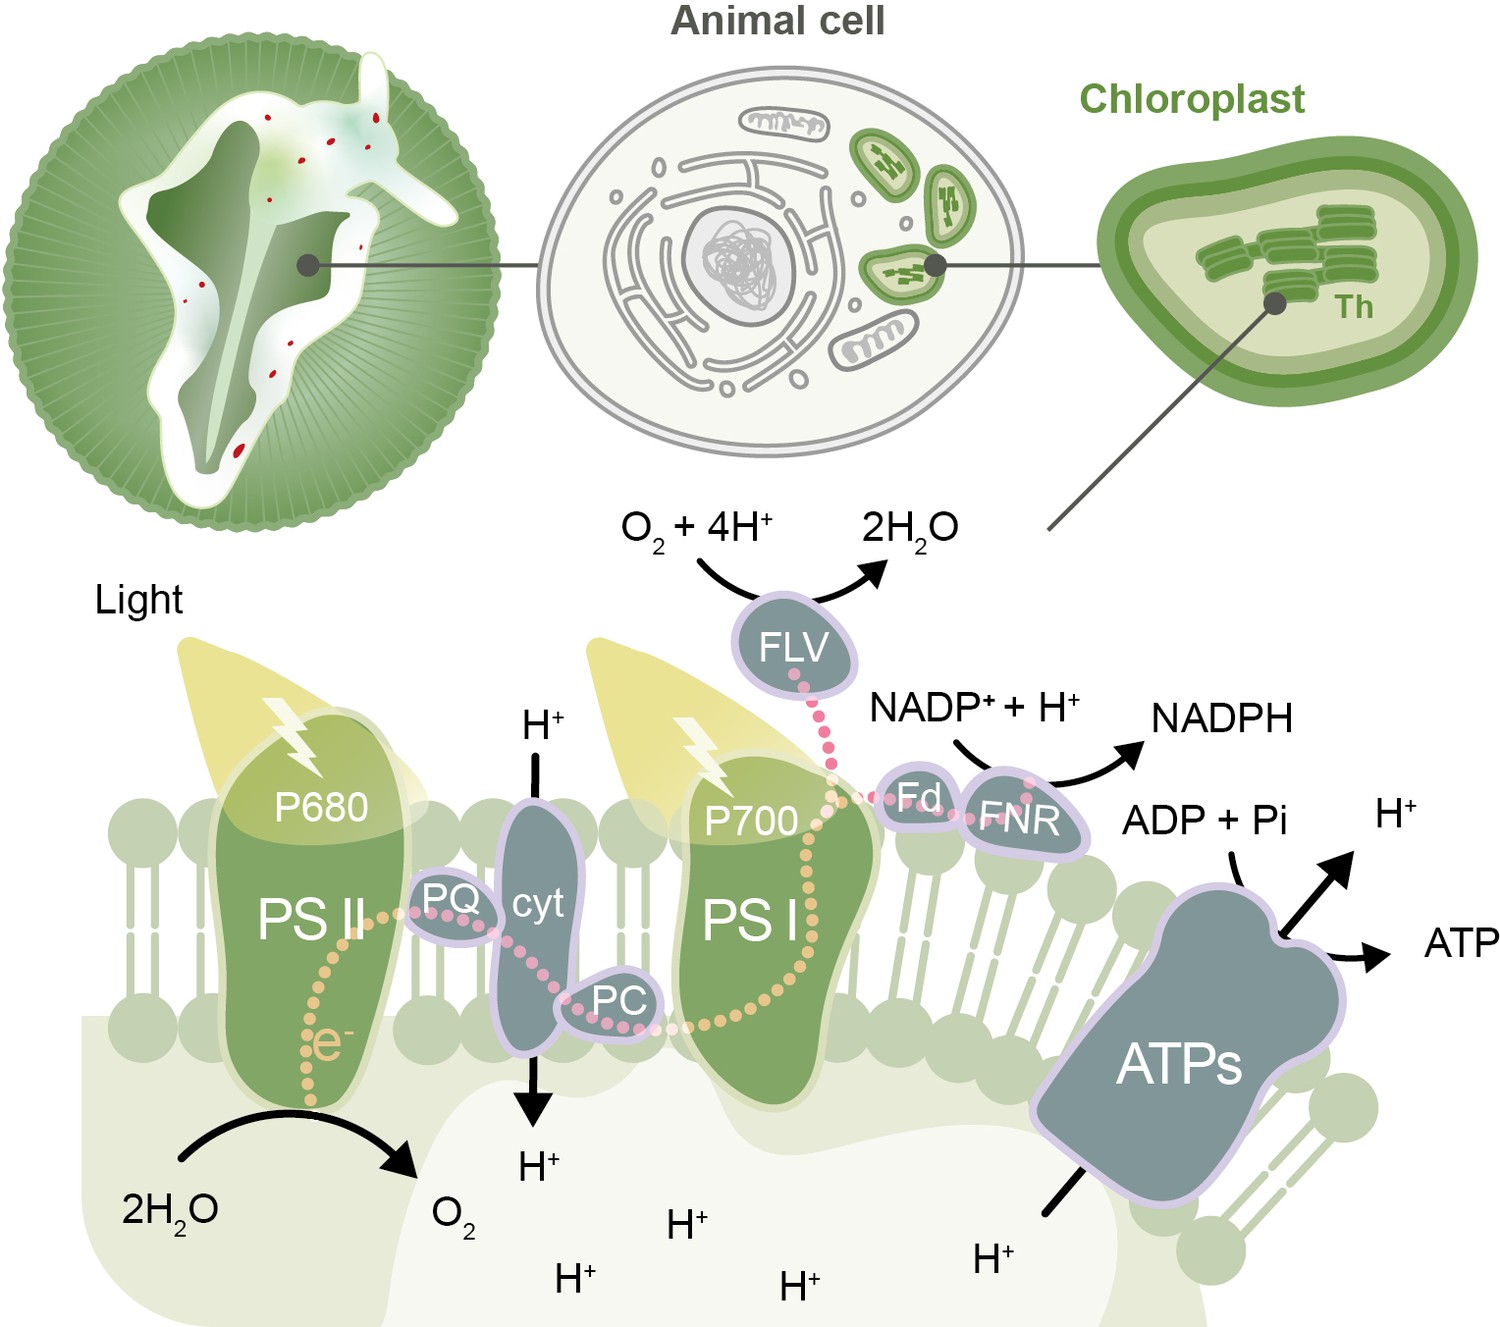 Photosynthesis: On the art of stealing chloroplasts | eLife